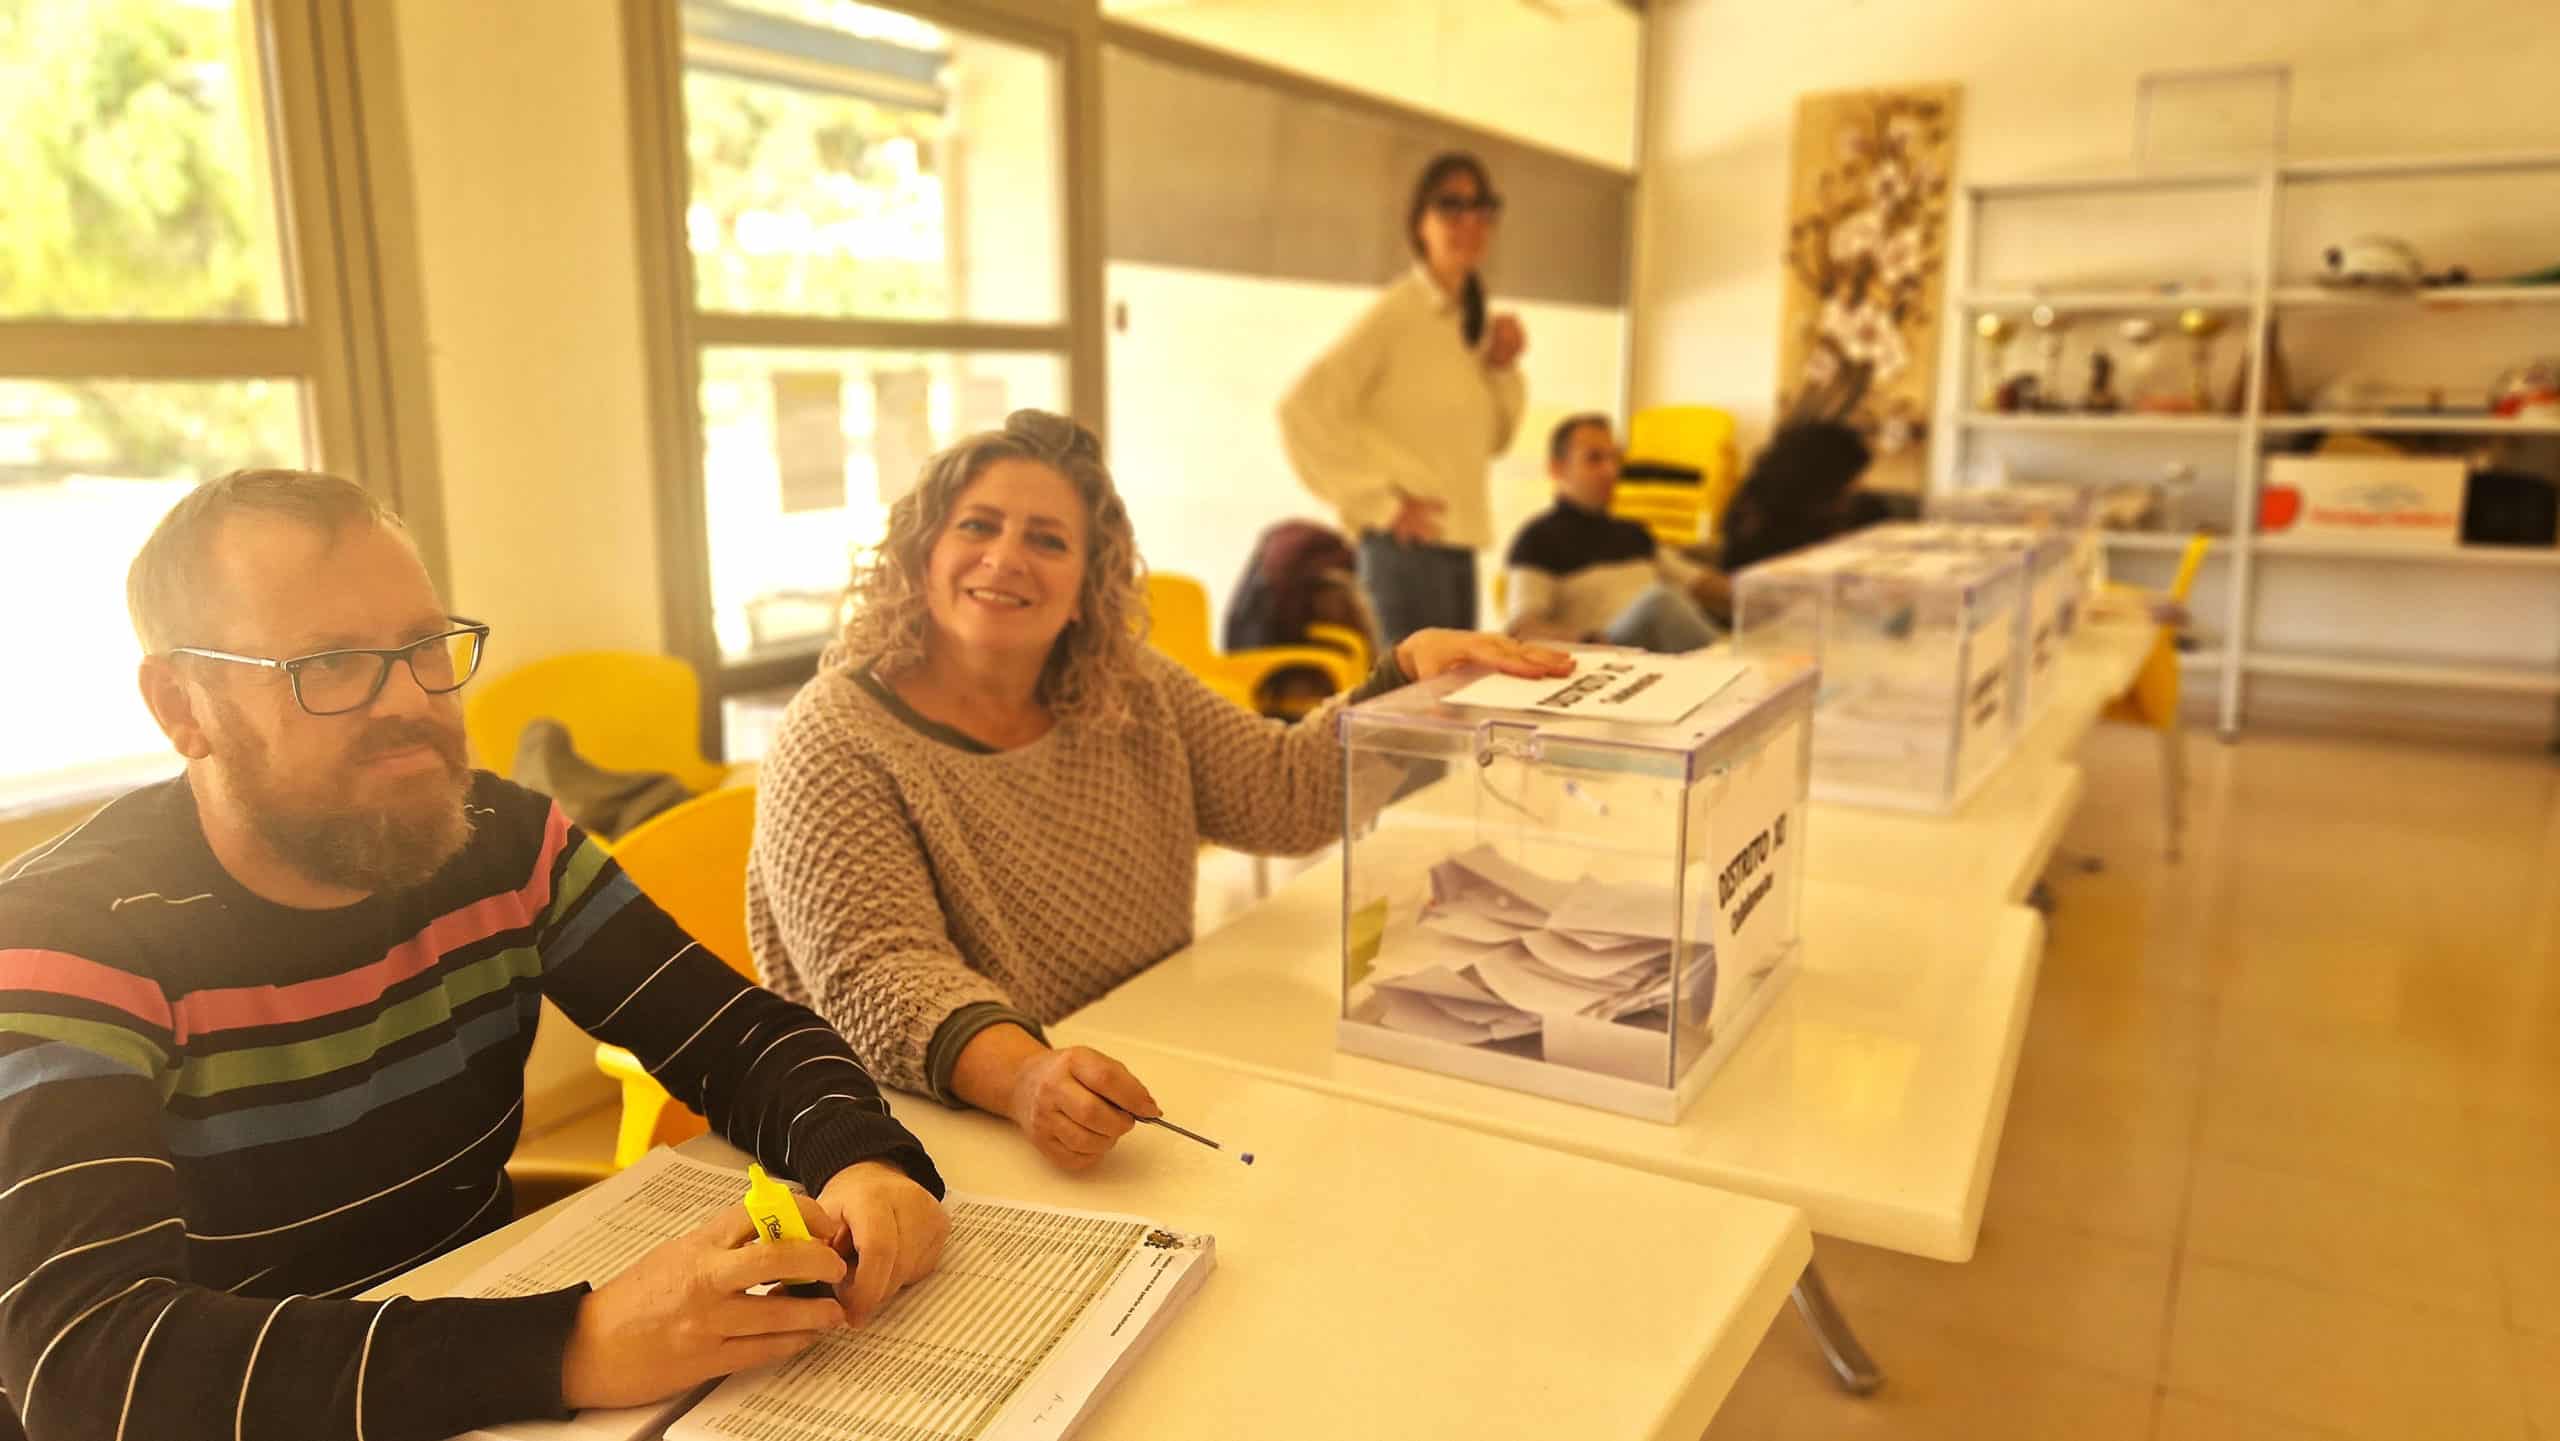 The staff in the Orihuela Costa Polling Station were very helpful